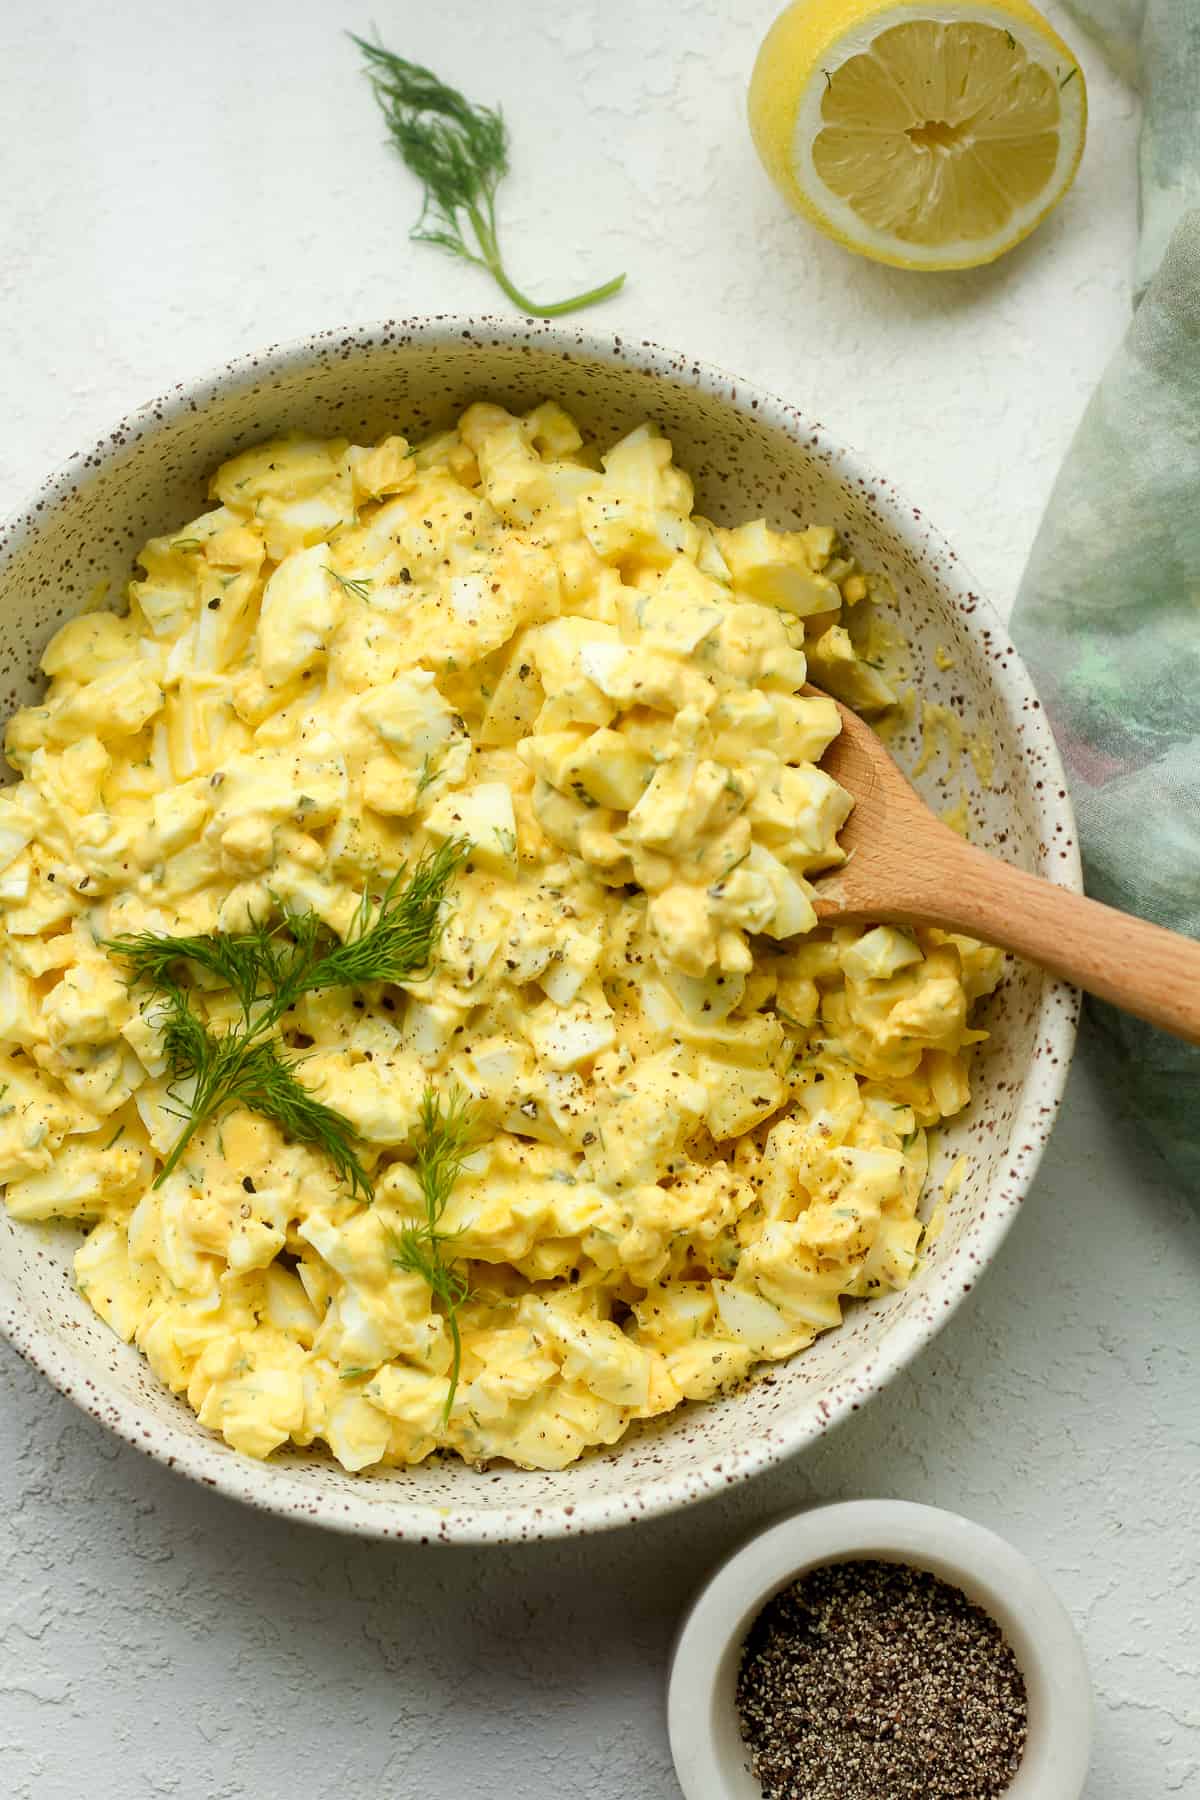 A bowl of egg salad with a wooden spoon.